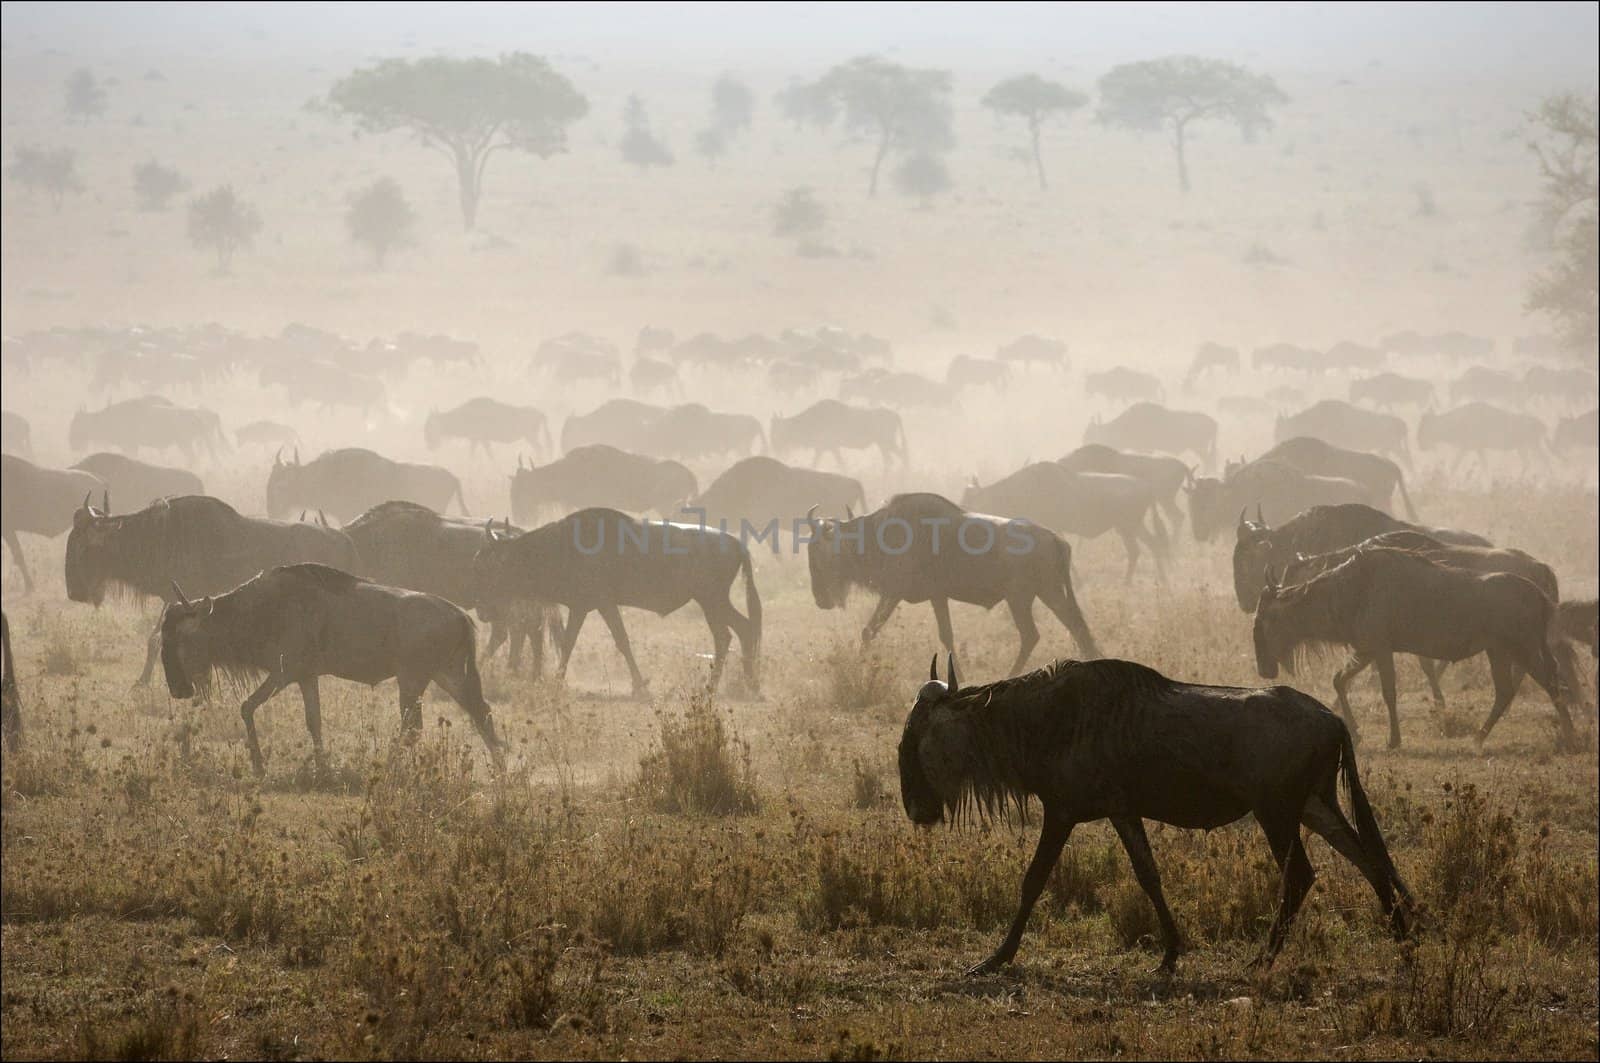 The herd of migrating antelopes goes on dusty savanna.